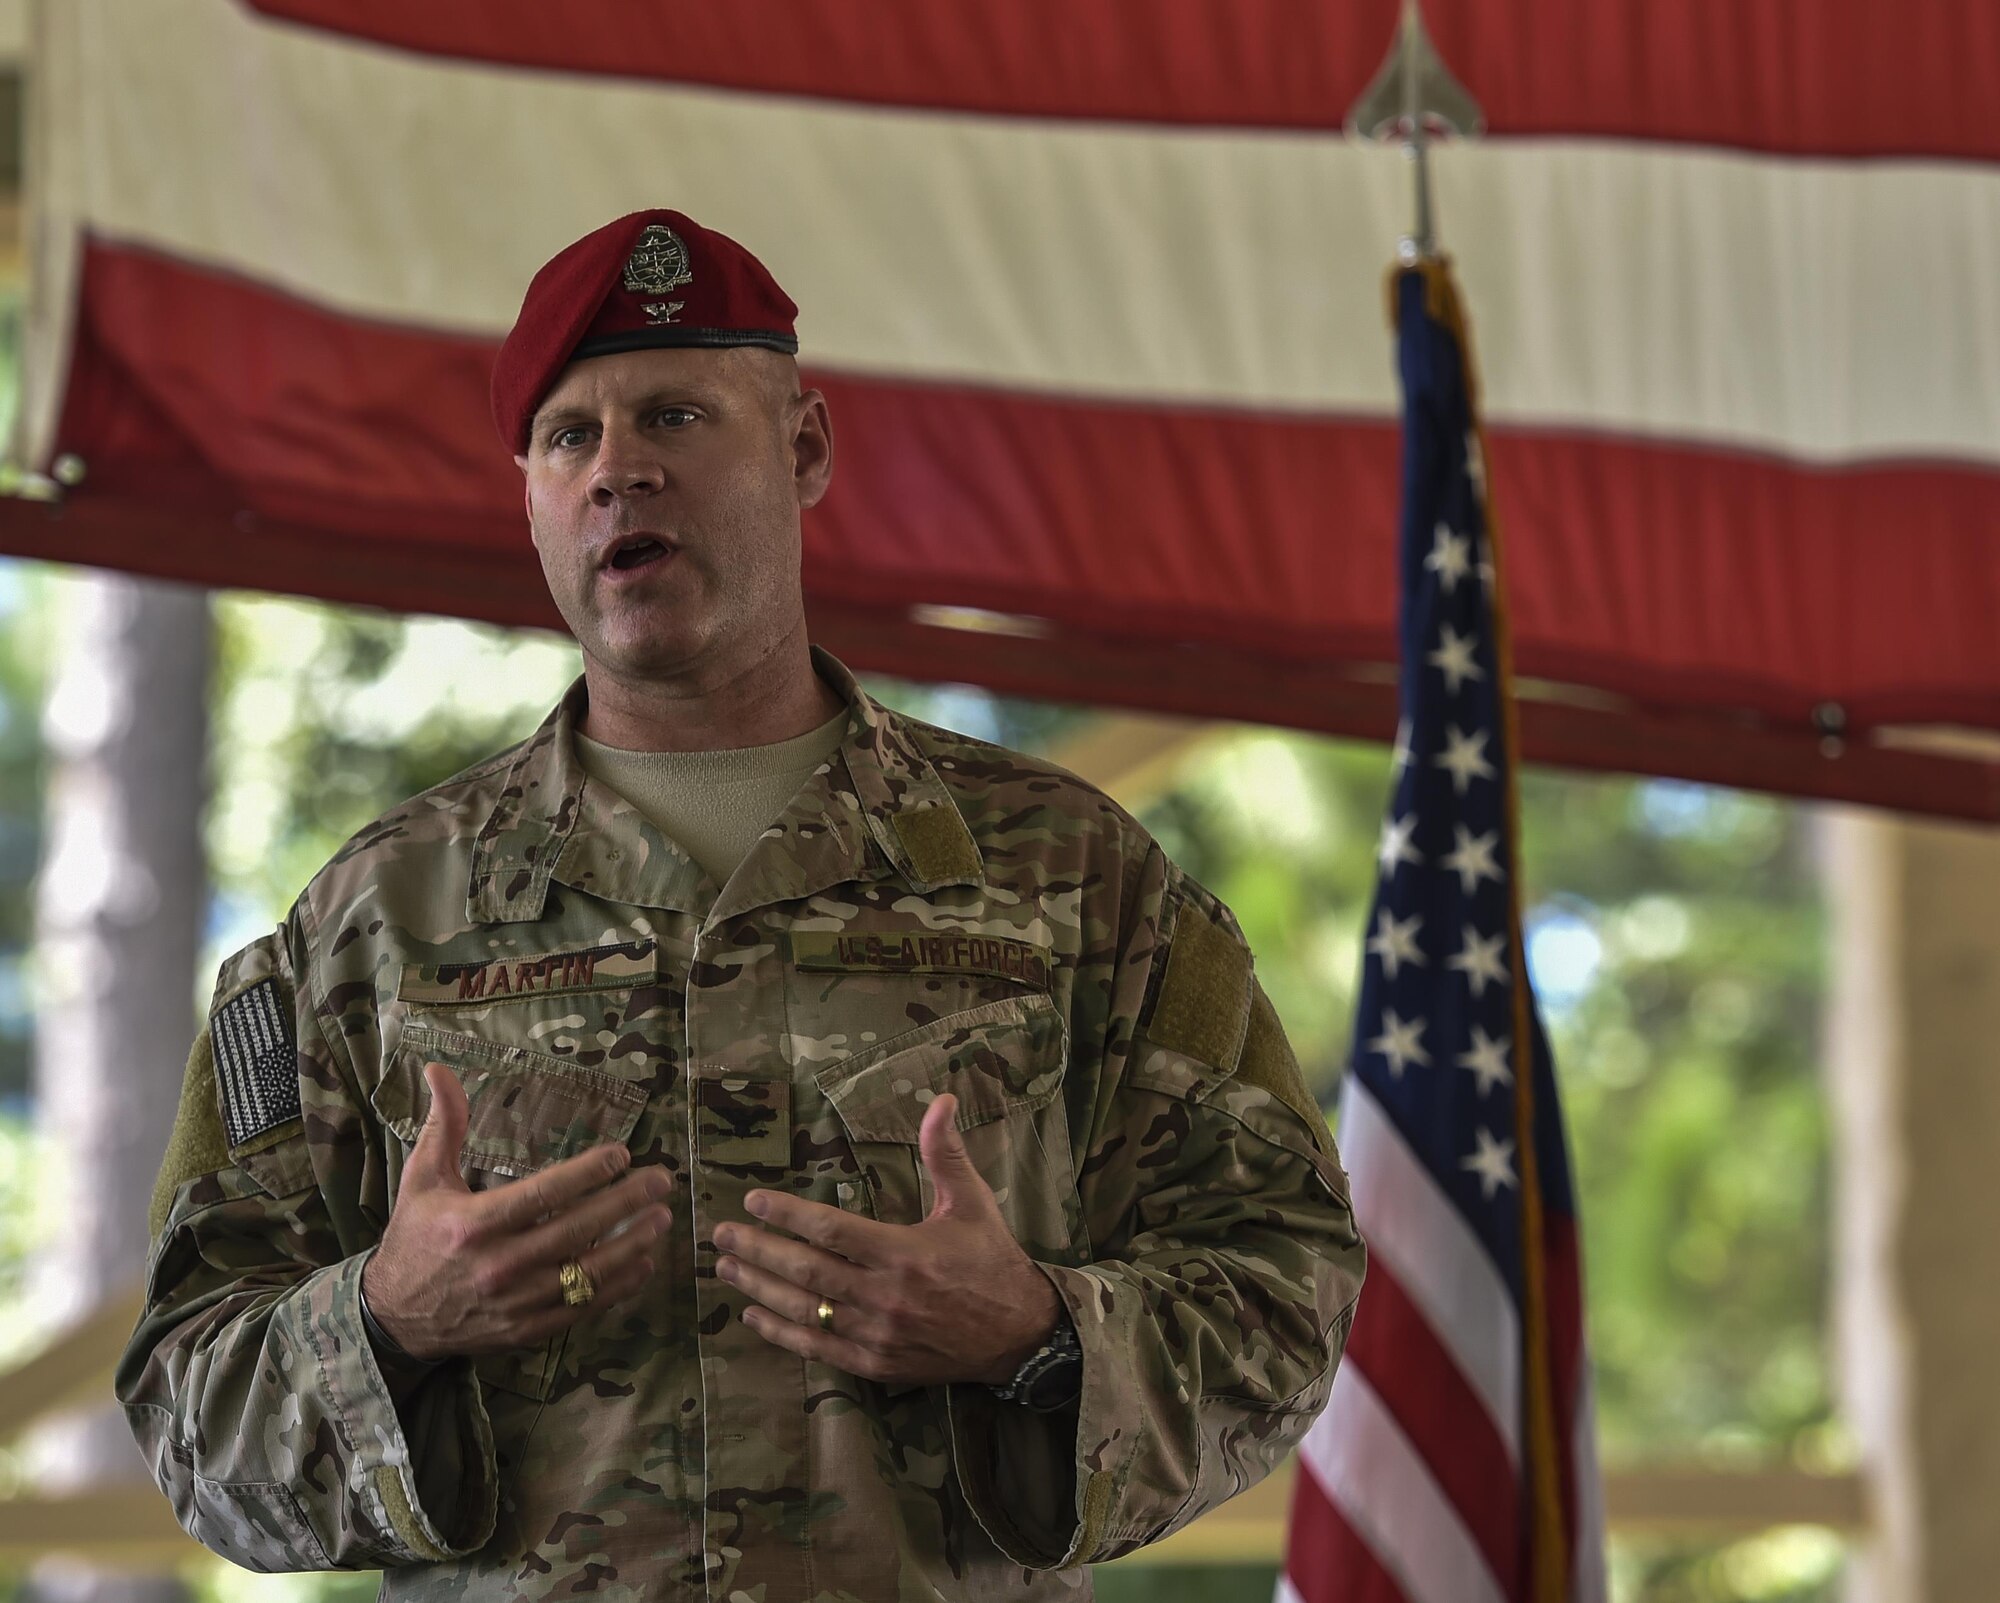 Col. Michael Martin, the commander of the 24th Special Operations Wing, speaks during the 24th SOW assumption of command at Hurlburt Field, Fla., July 14, 2016. The 24th SOW, previously commanded by Col. Matthew Davidson, boasts a unique ground operations mission set and approximately 1,500 of the 2,500 Special Tactics members in the Air Force. Martin previously served as the deputy commander of Special Operations Command-Africa in Stuttgart, Germany. (U.S. Air Force photo by Senior Airman Ryan Conroy) 